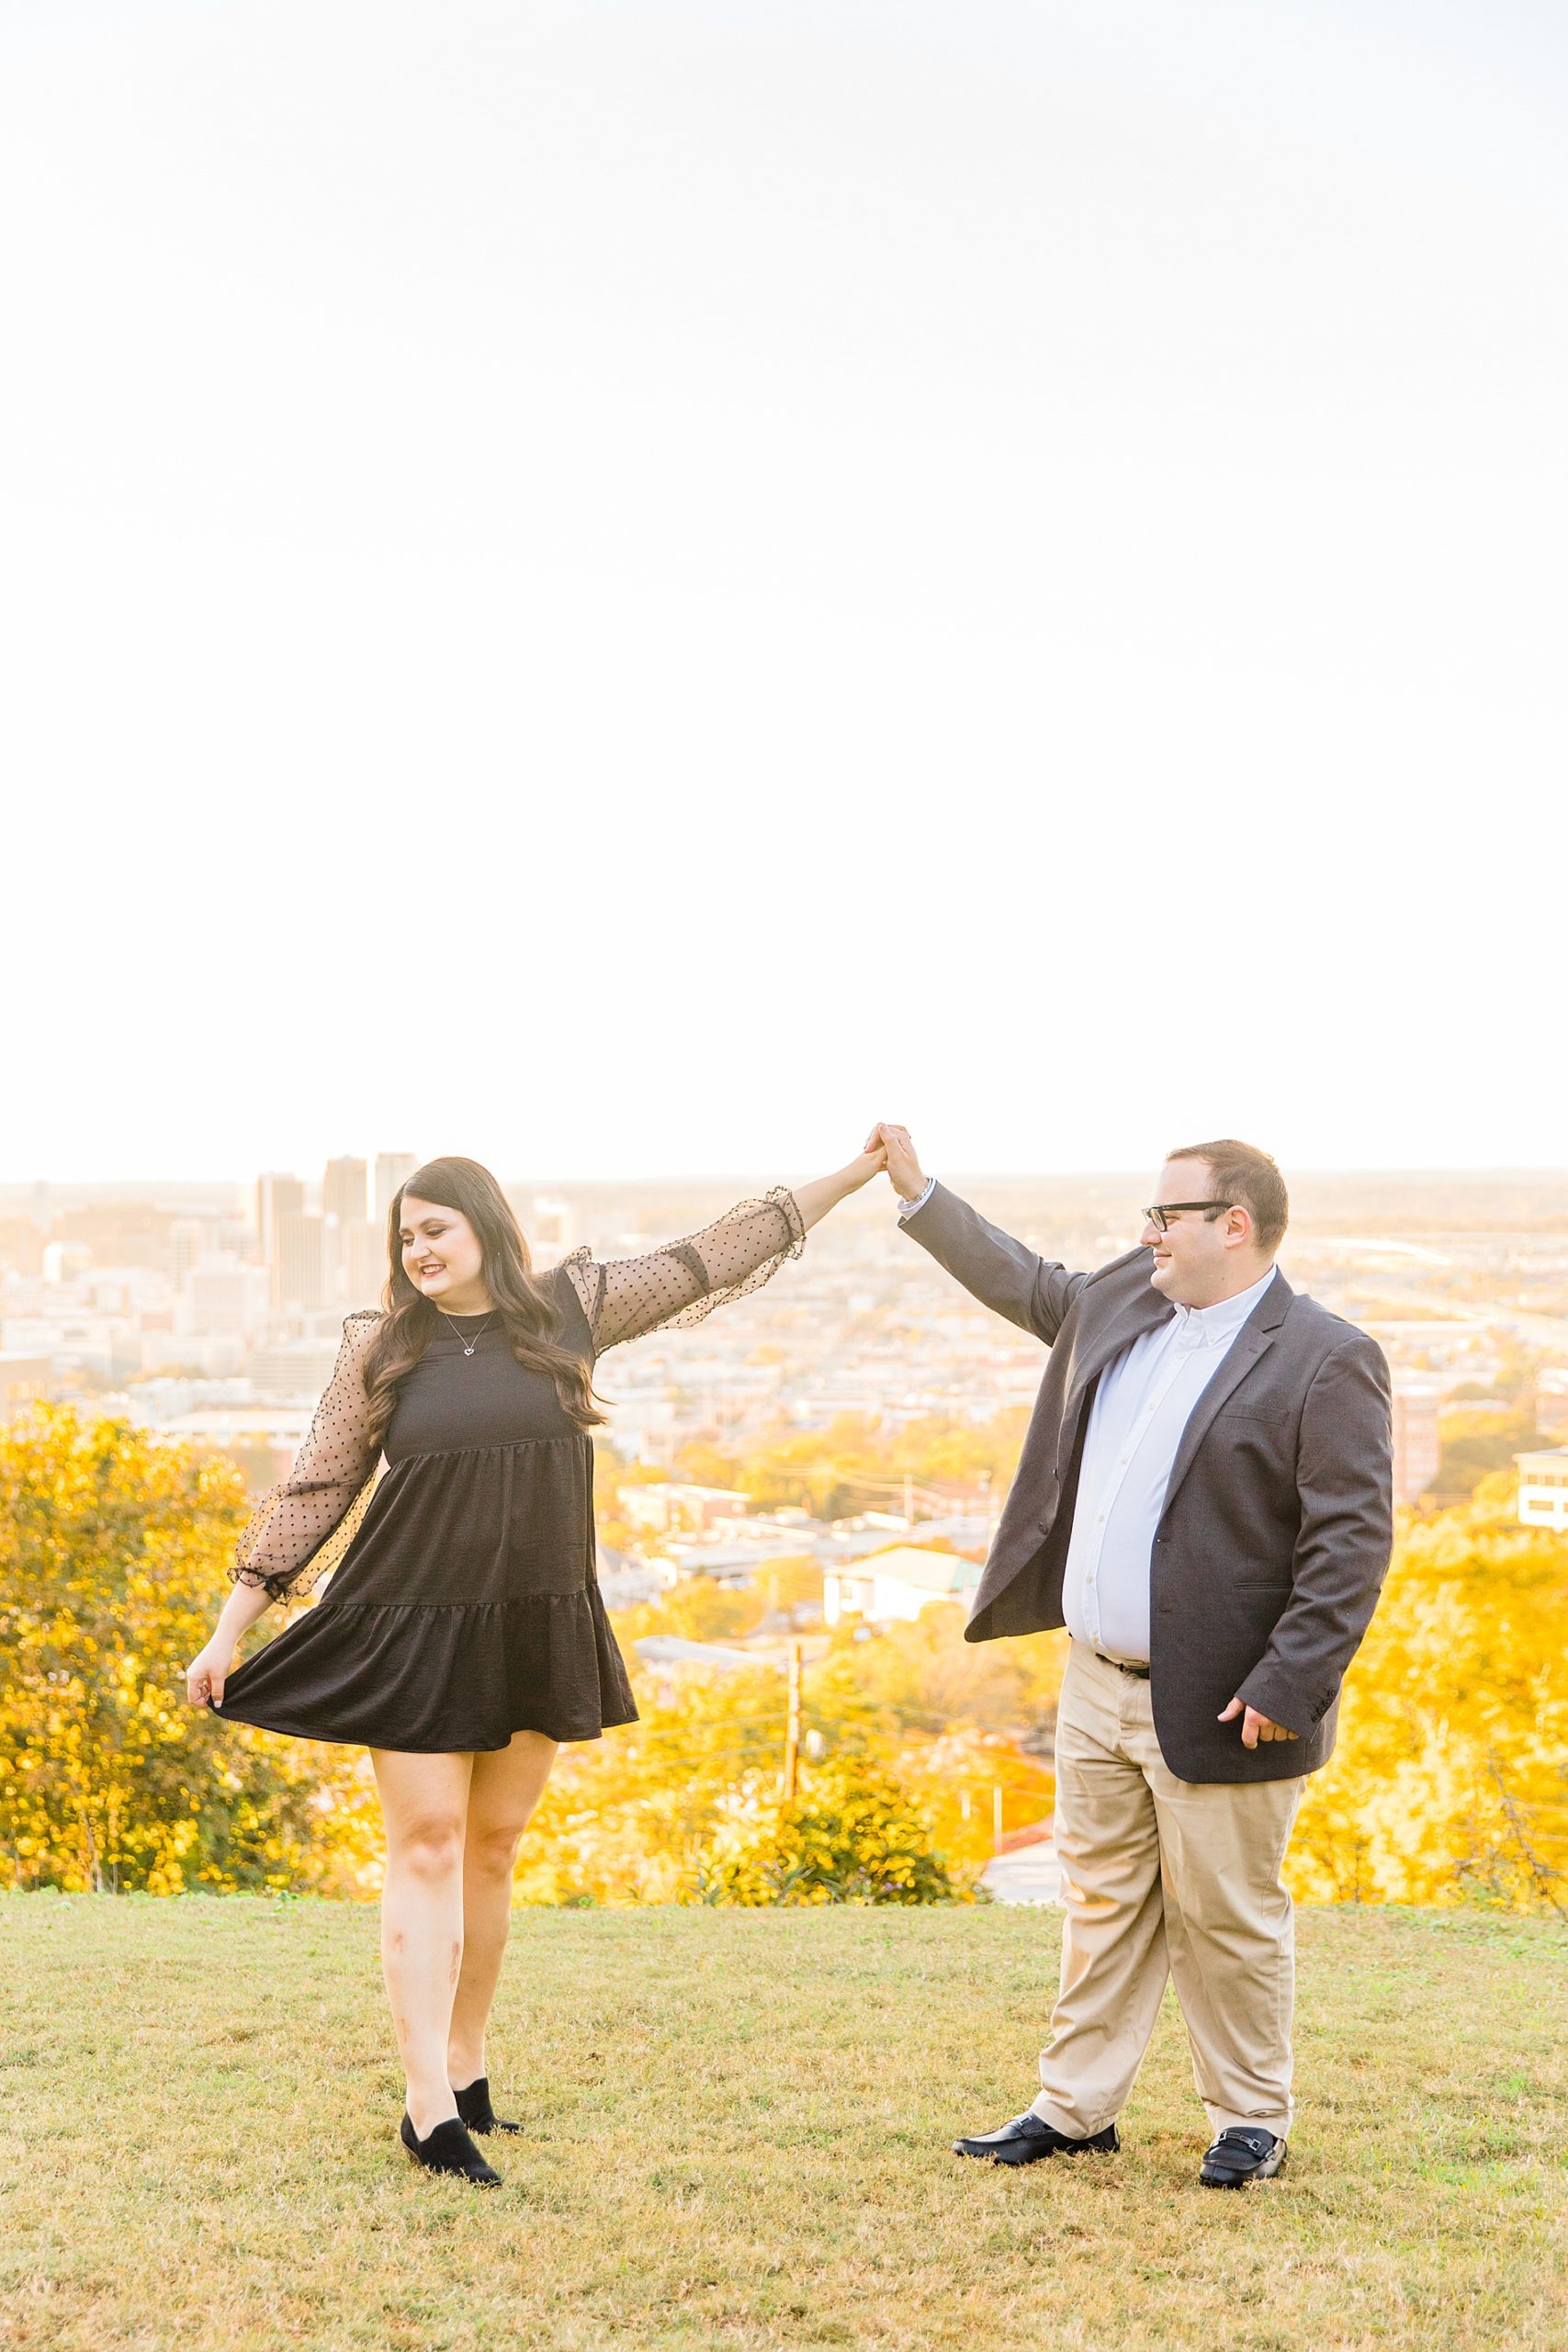 A Year of Birmingham Alabama Engagement Sessions couple on rooftop over Birmingham AL skyline